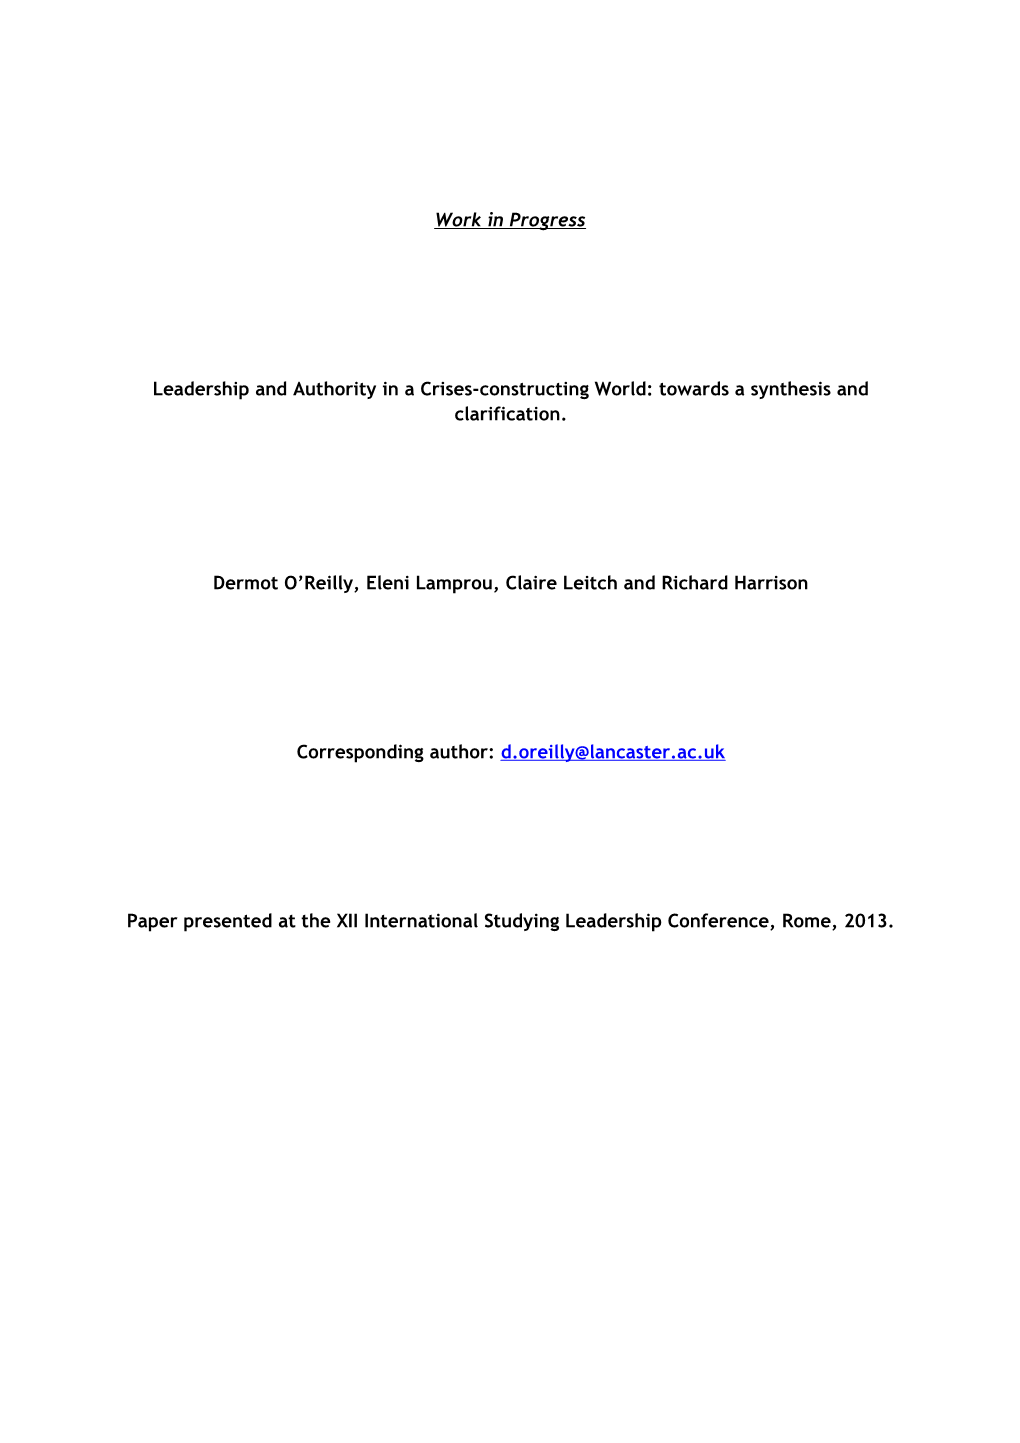 Leadership and Authority in a Crises-Constructing World: Towards a Synthesisand Clarification